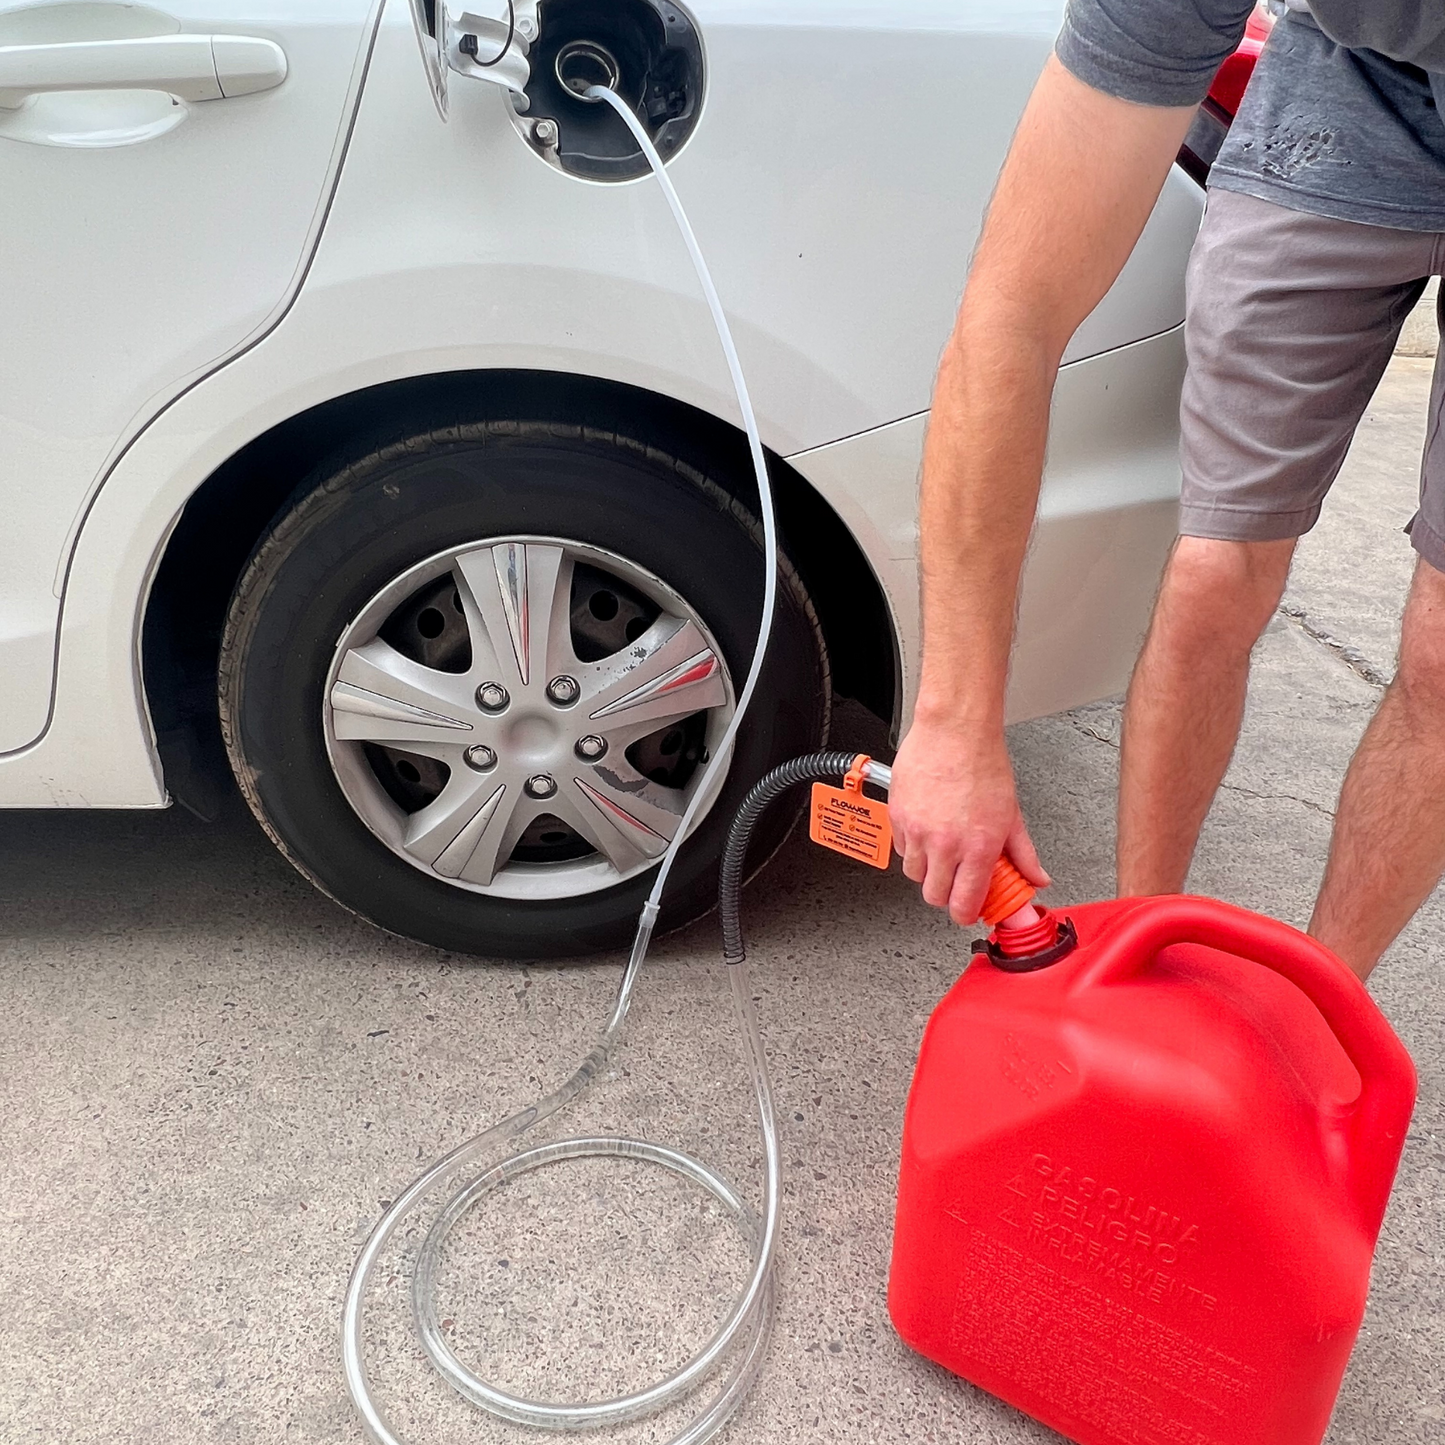 Man holding Handy Pump moving fuel from car to gas can 